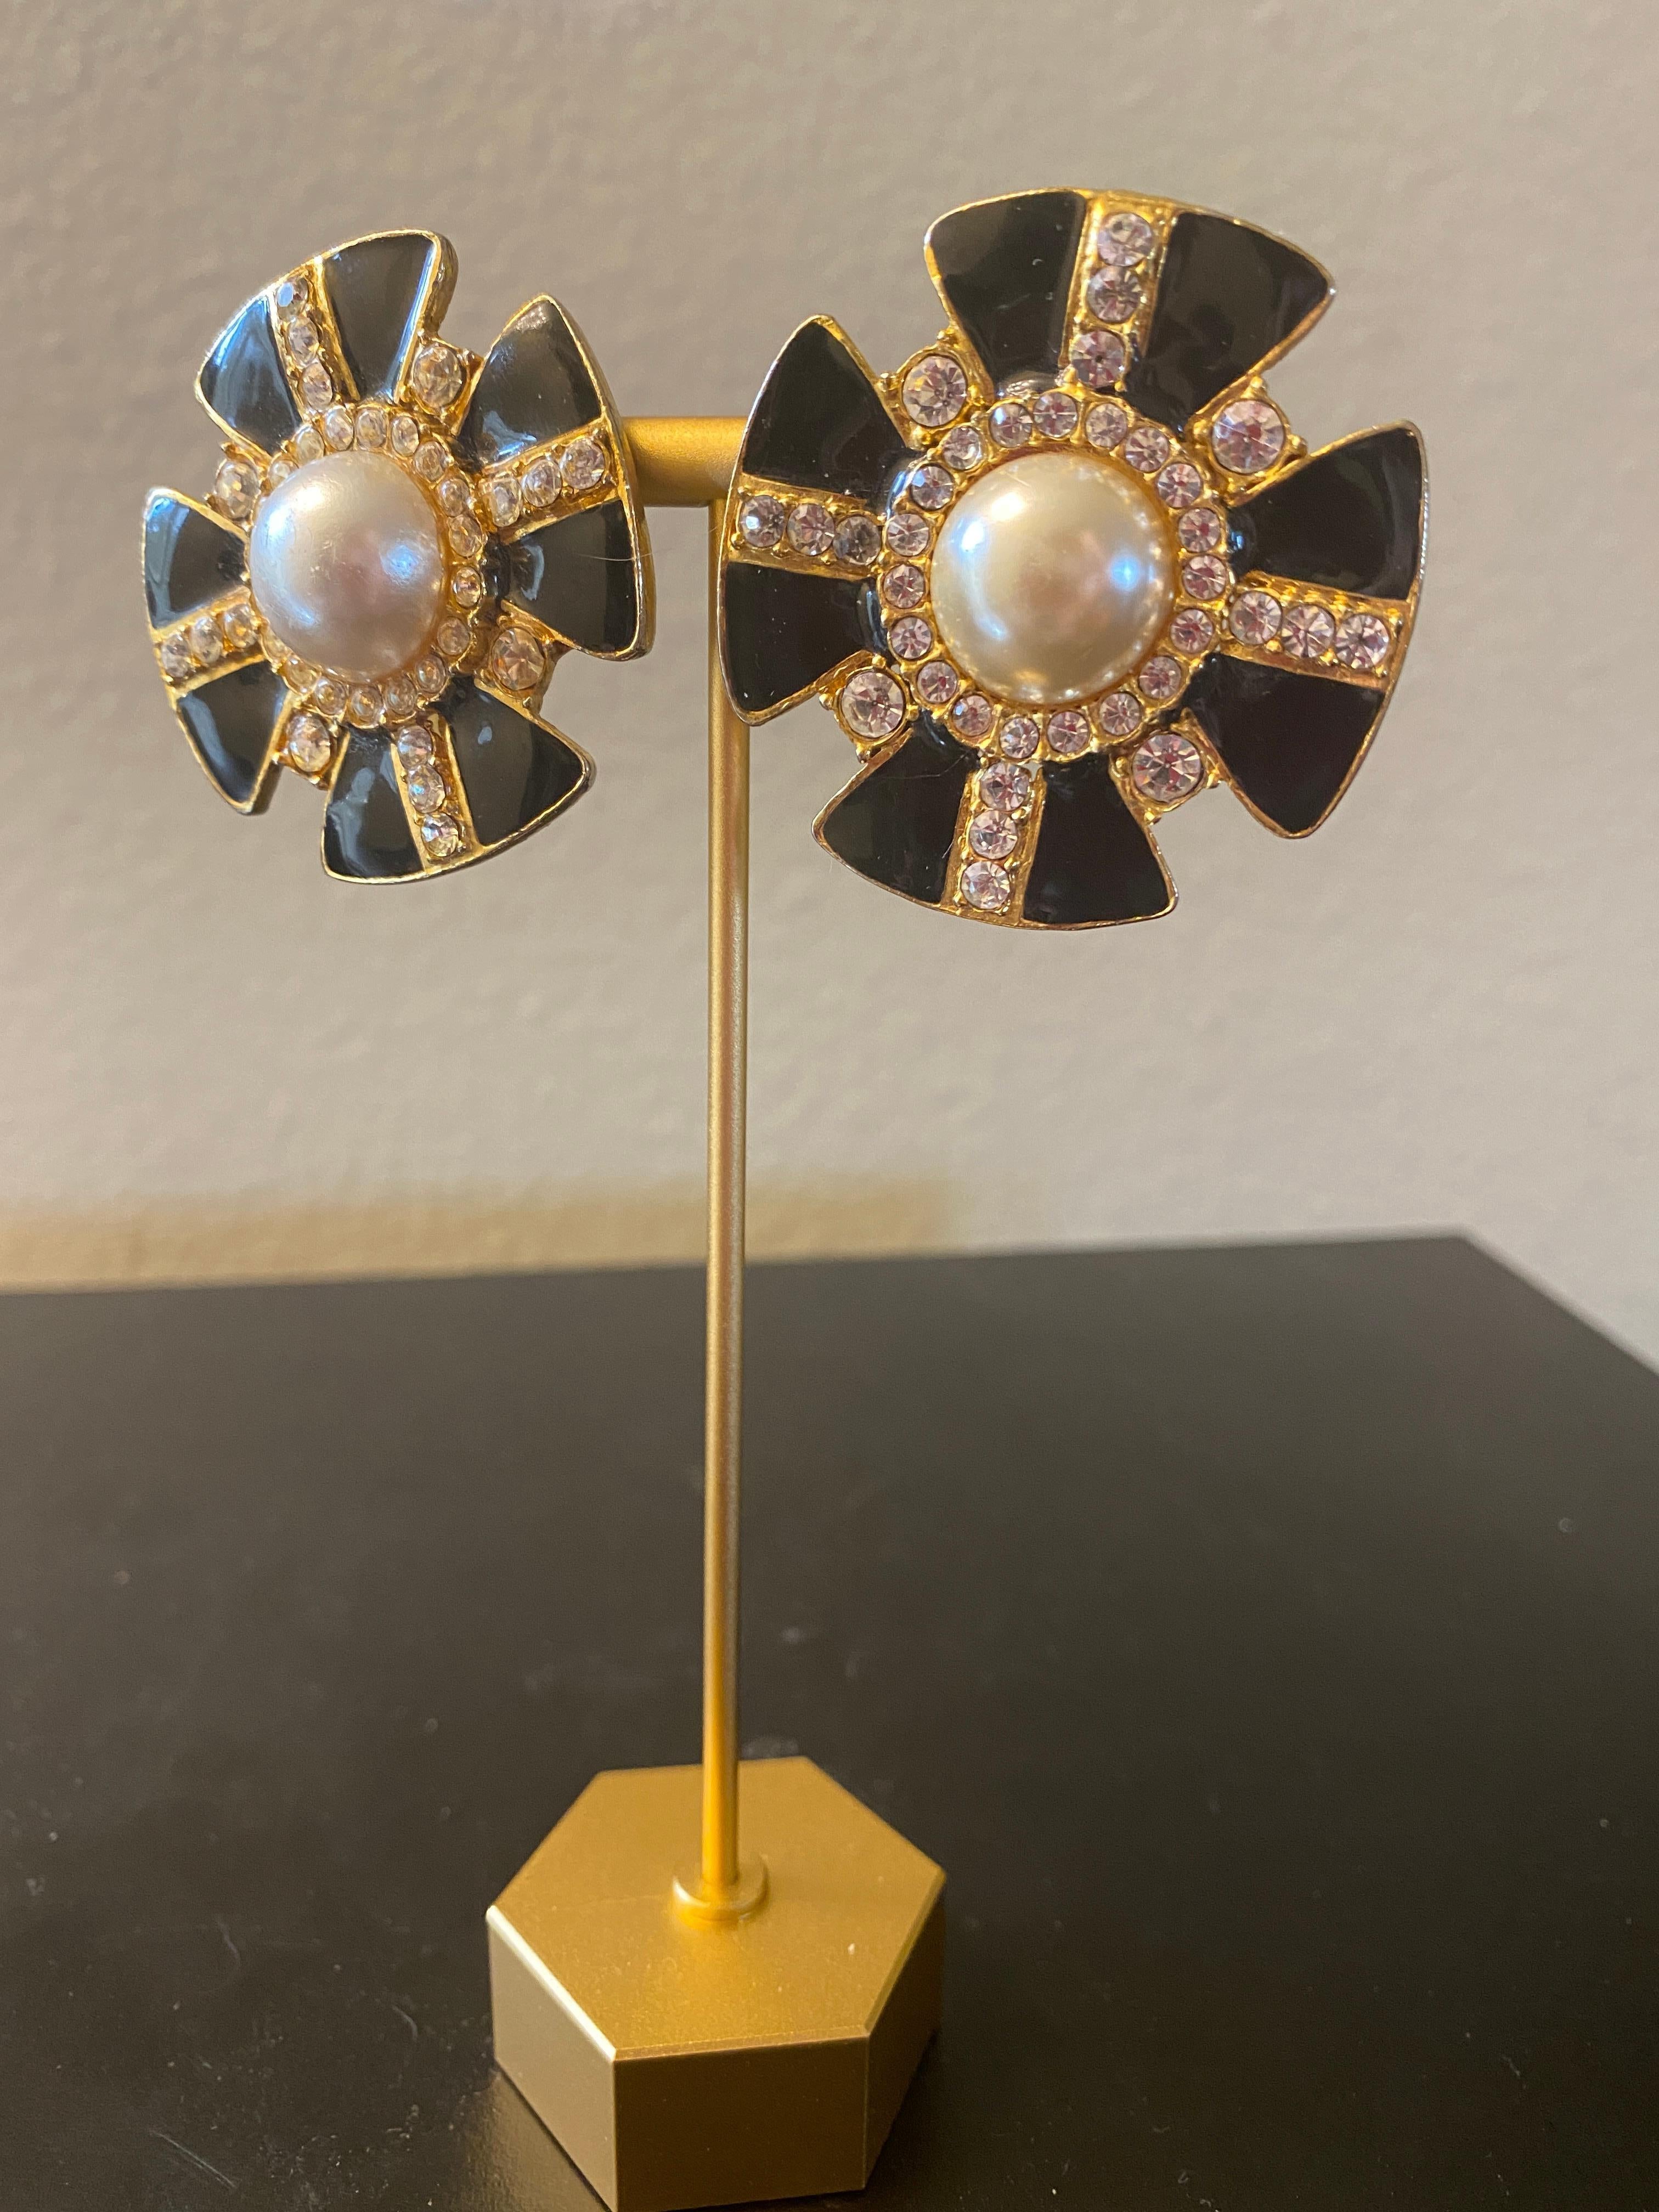 Art Deco Palm Springs Fashionista Curated Vintage Earring Collection 1950s-2000 #24/100